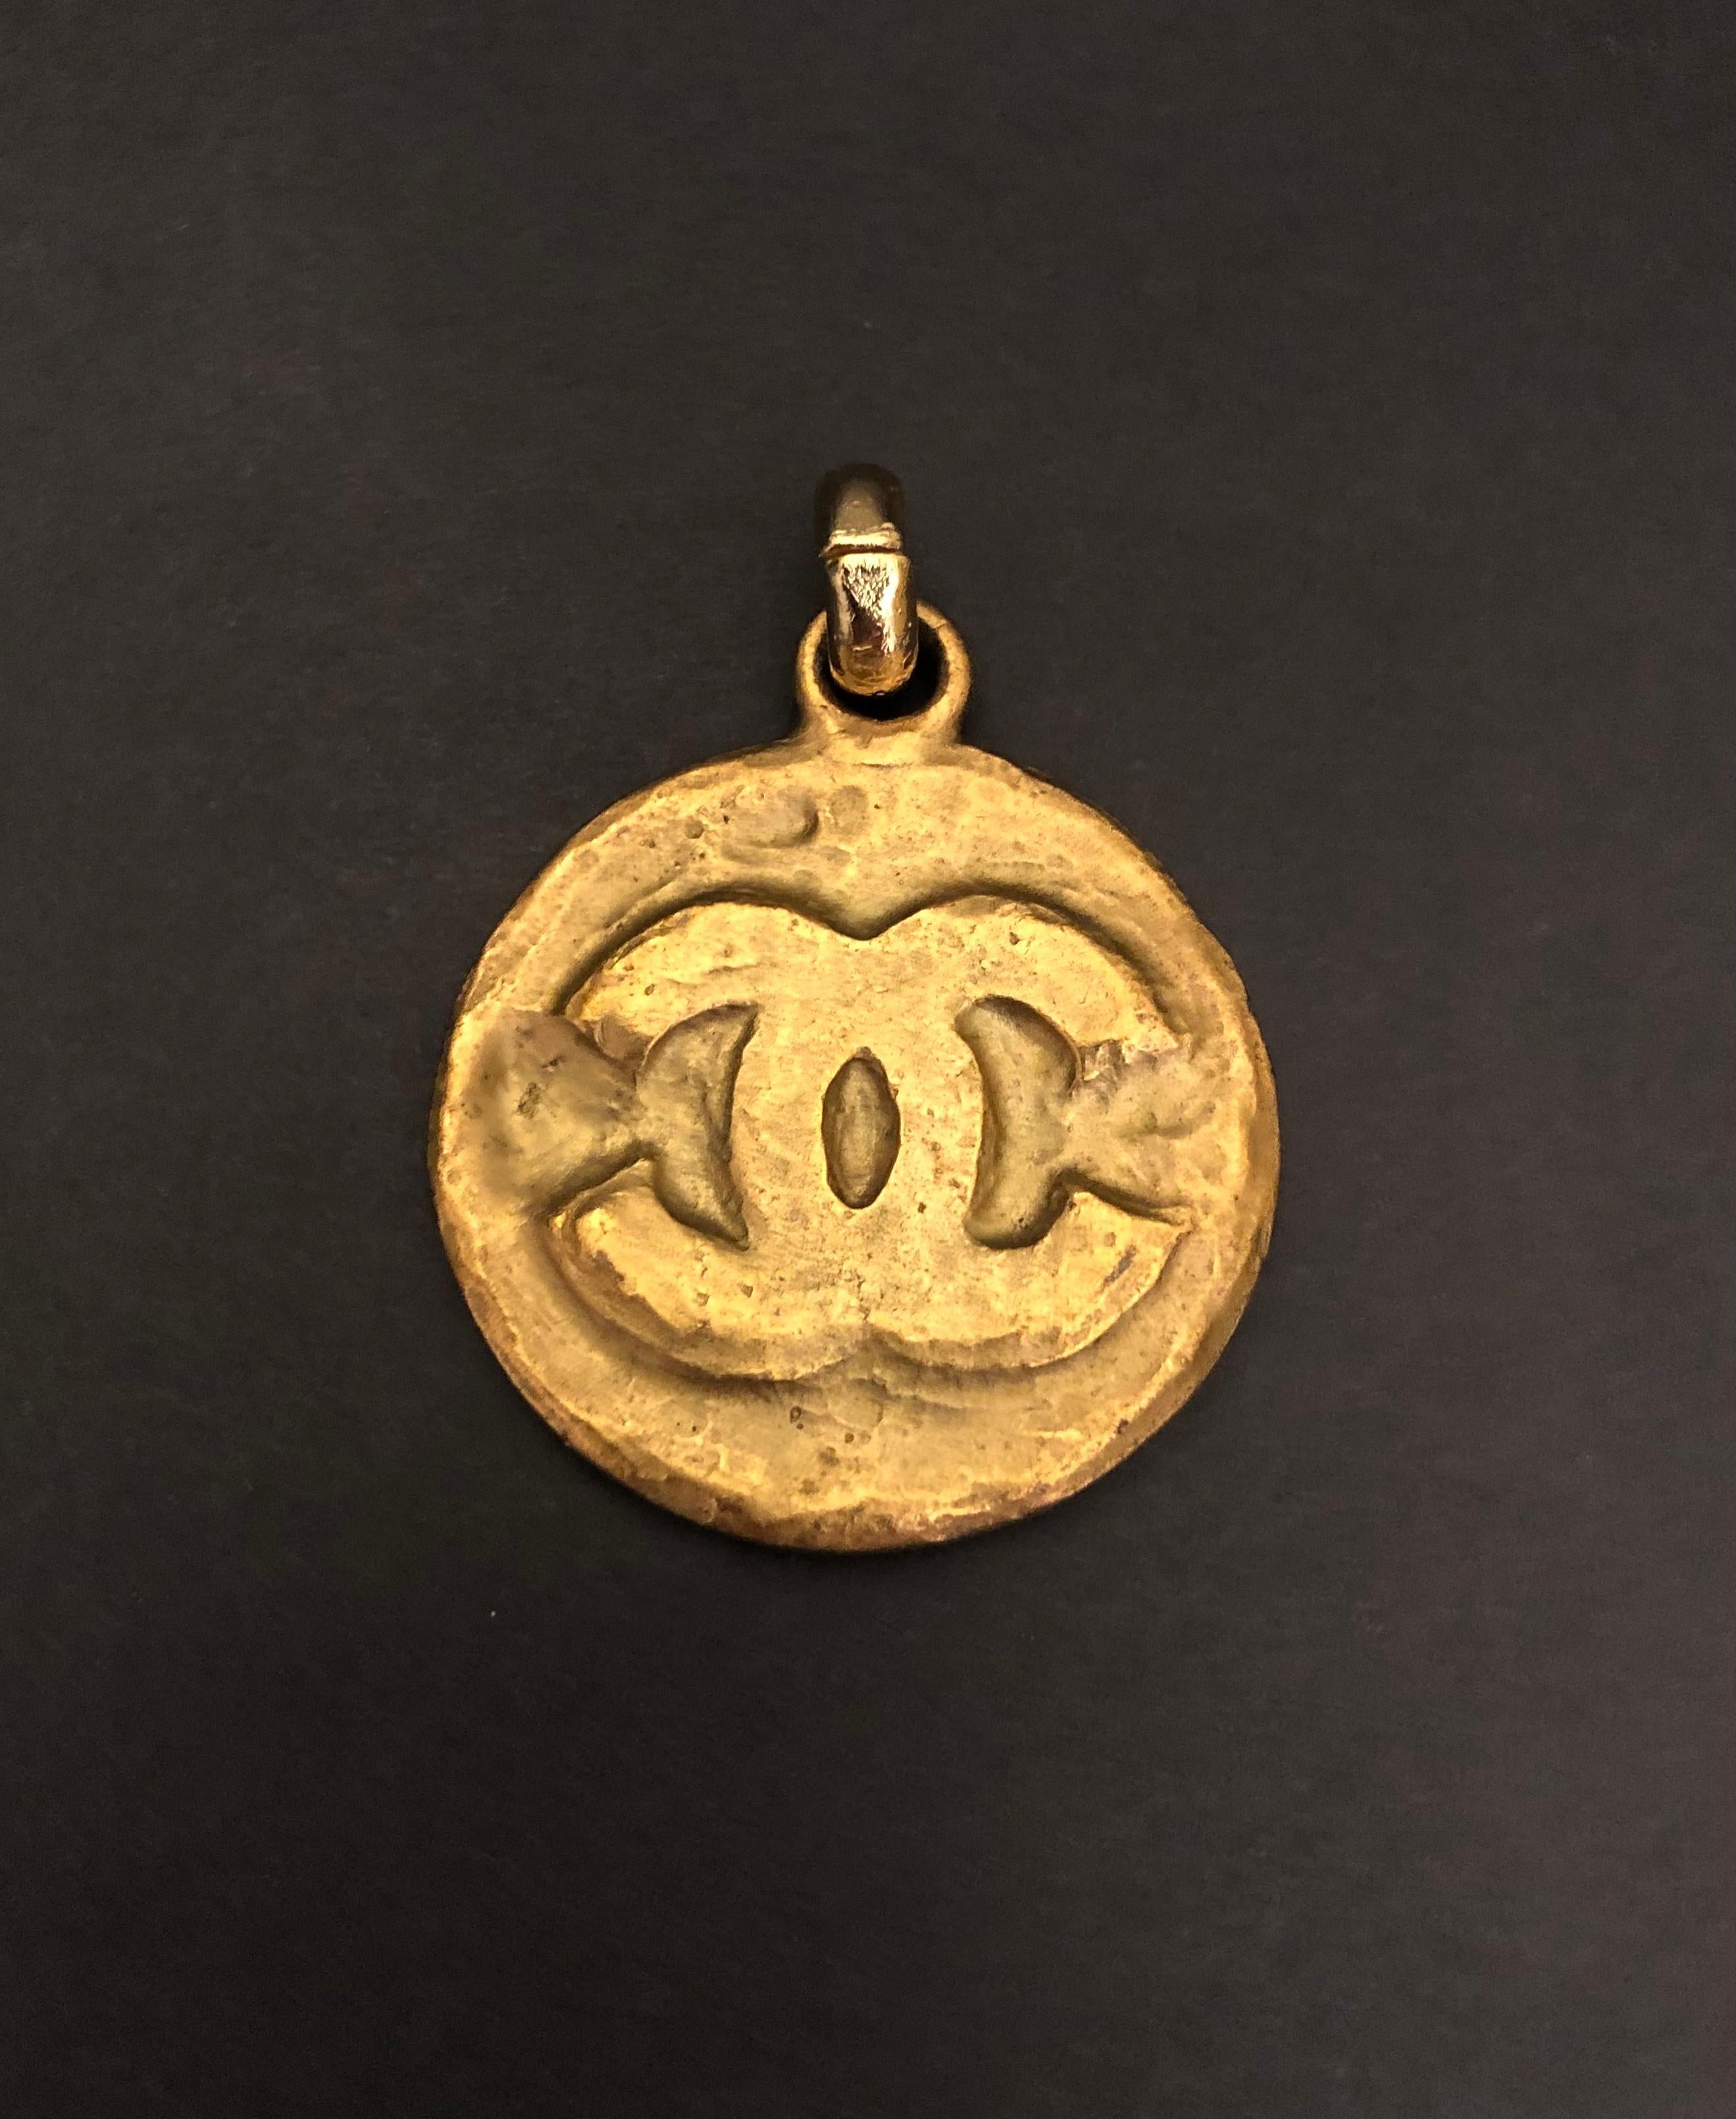 This vintage CHANEL gold toned CC medallion charm that was part of a vintage CHANEL keychain is crafted of gold toned metal in Byzantine style. Measures approximately 4 x 4.7 cm. Stamped Chanel 94P made in France. 

NOTE: The necklace in the picture